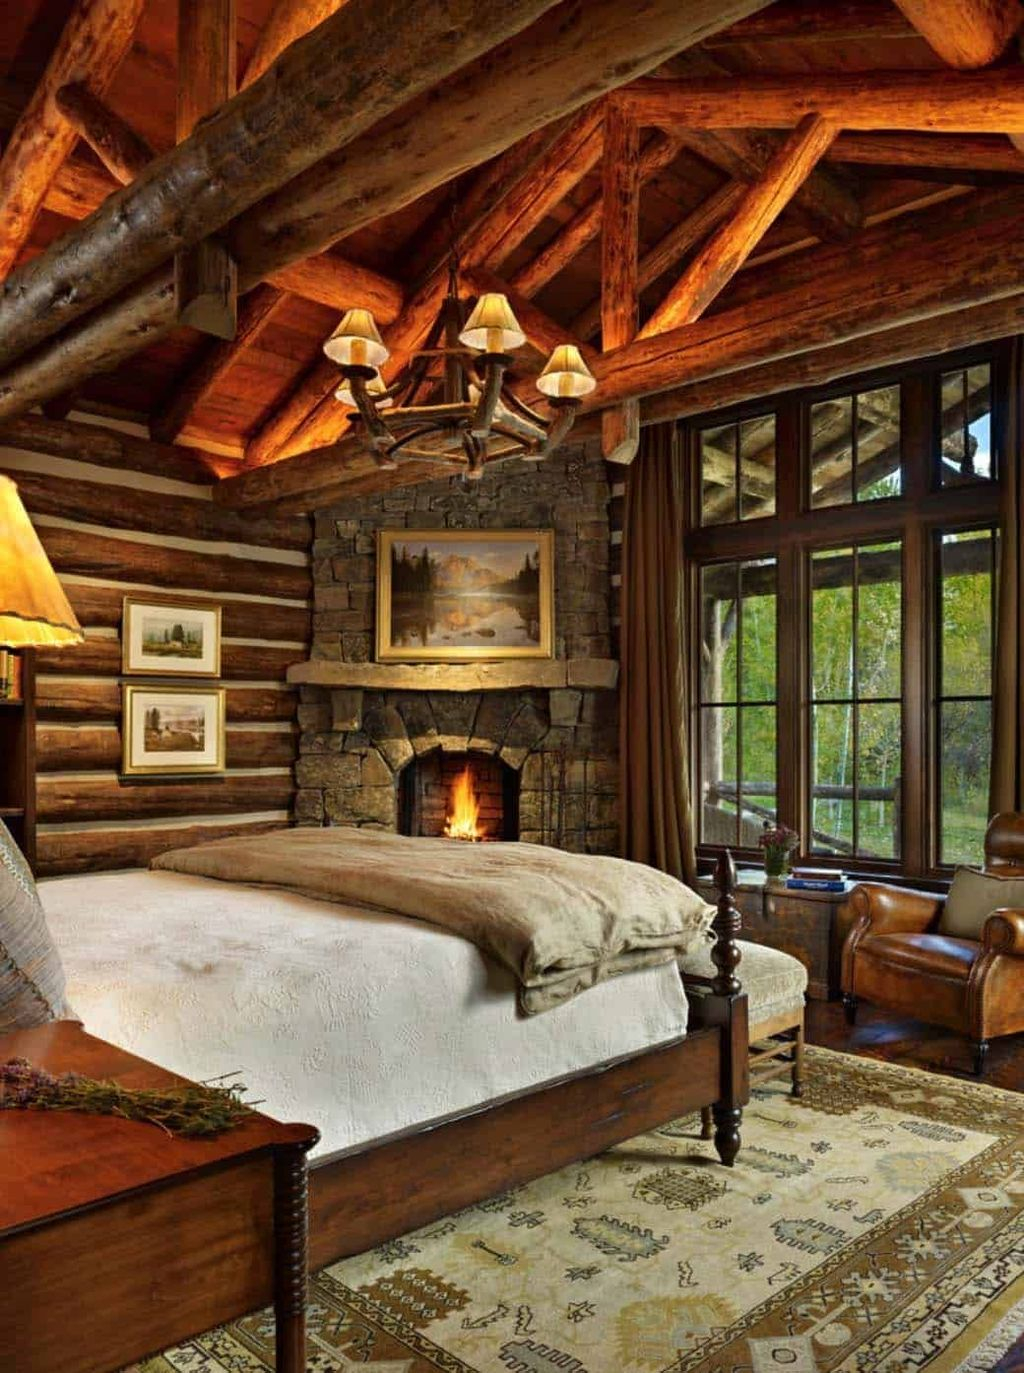 Gorgeous Log Cabin Style Home Interior Design11